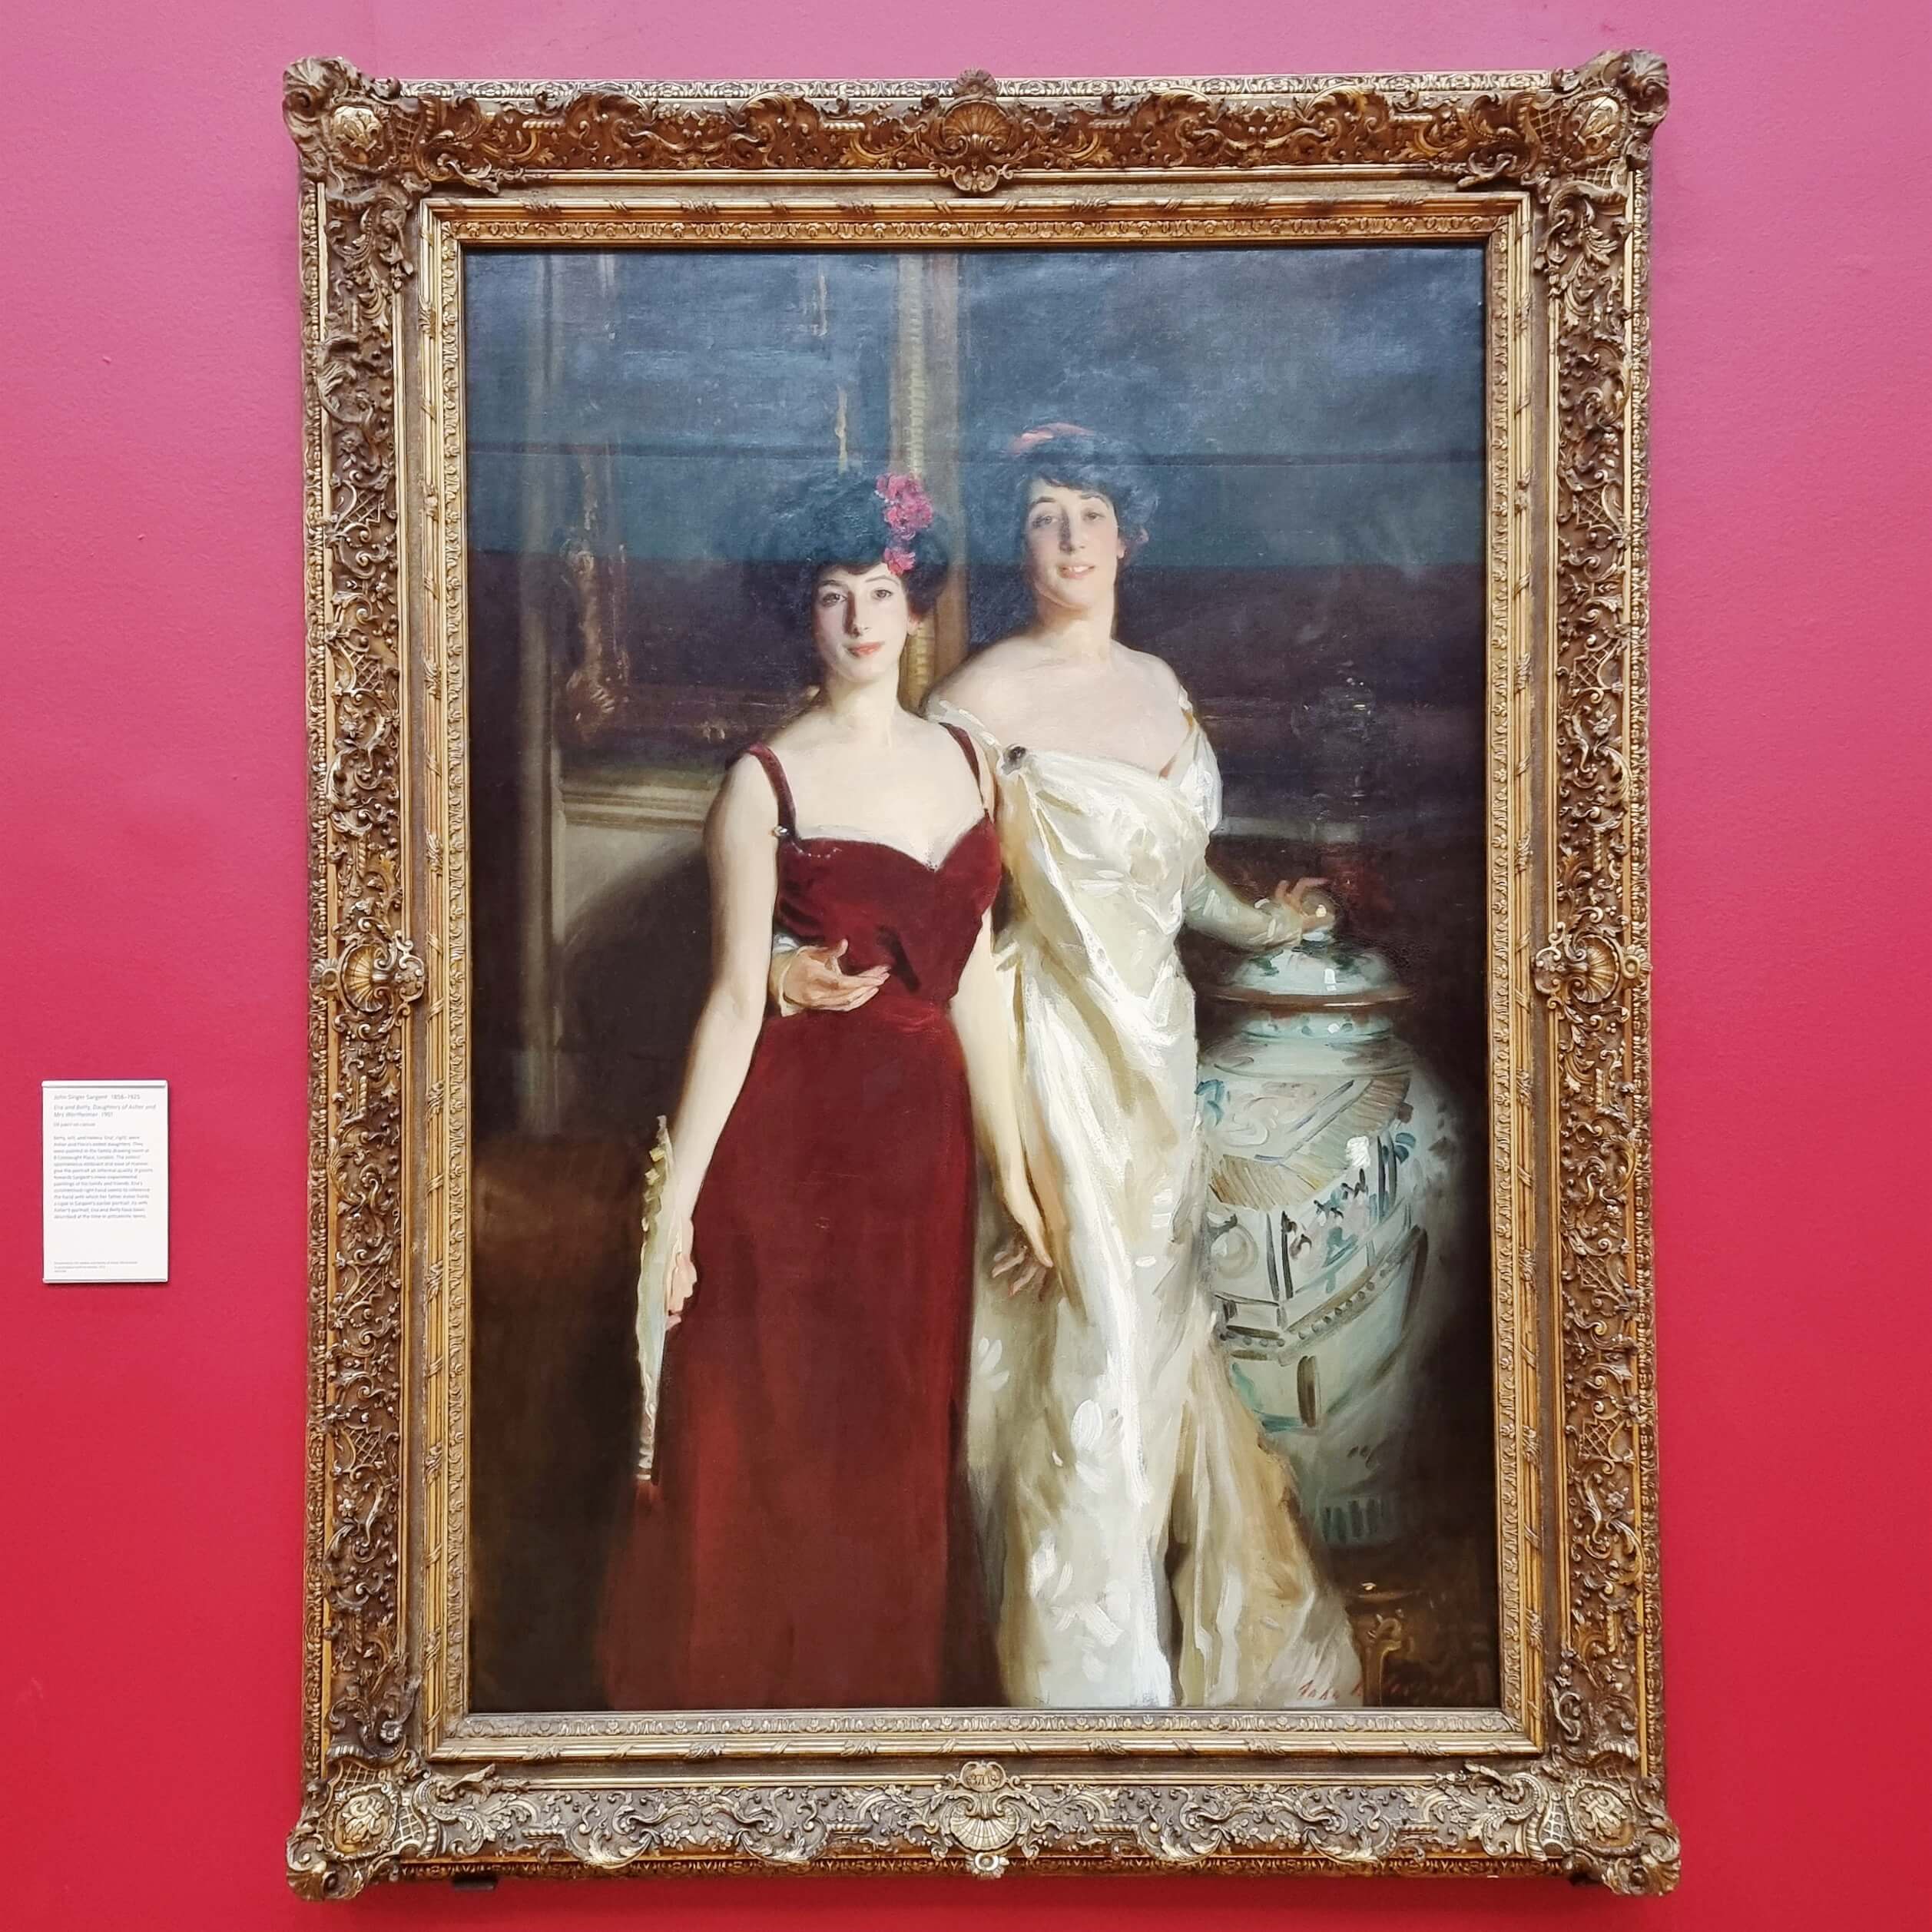 Ena and Betty, Daughters of Asher and Mrs Wertheimer / John Singer Sargent / © Tate Britain